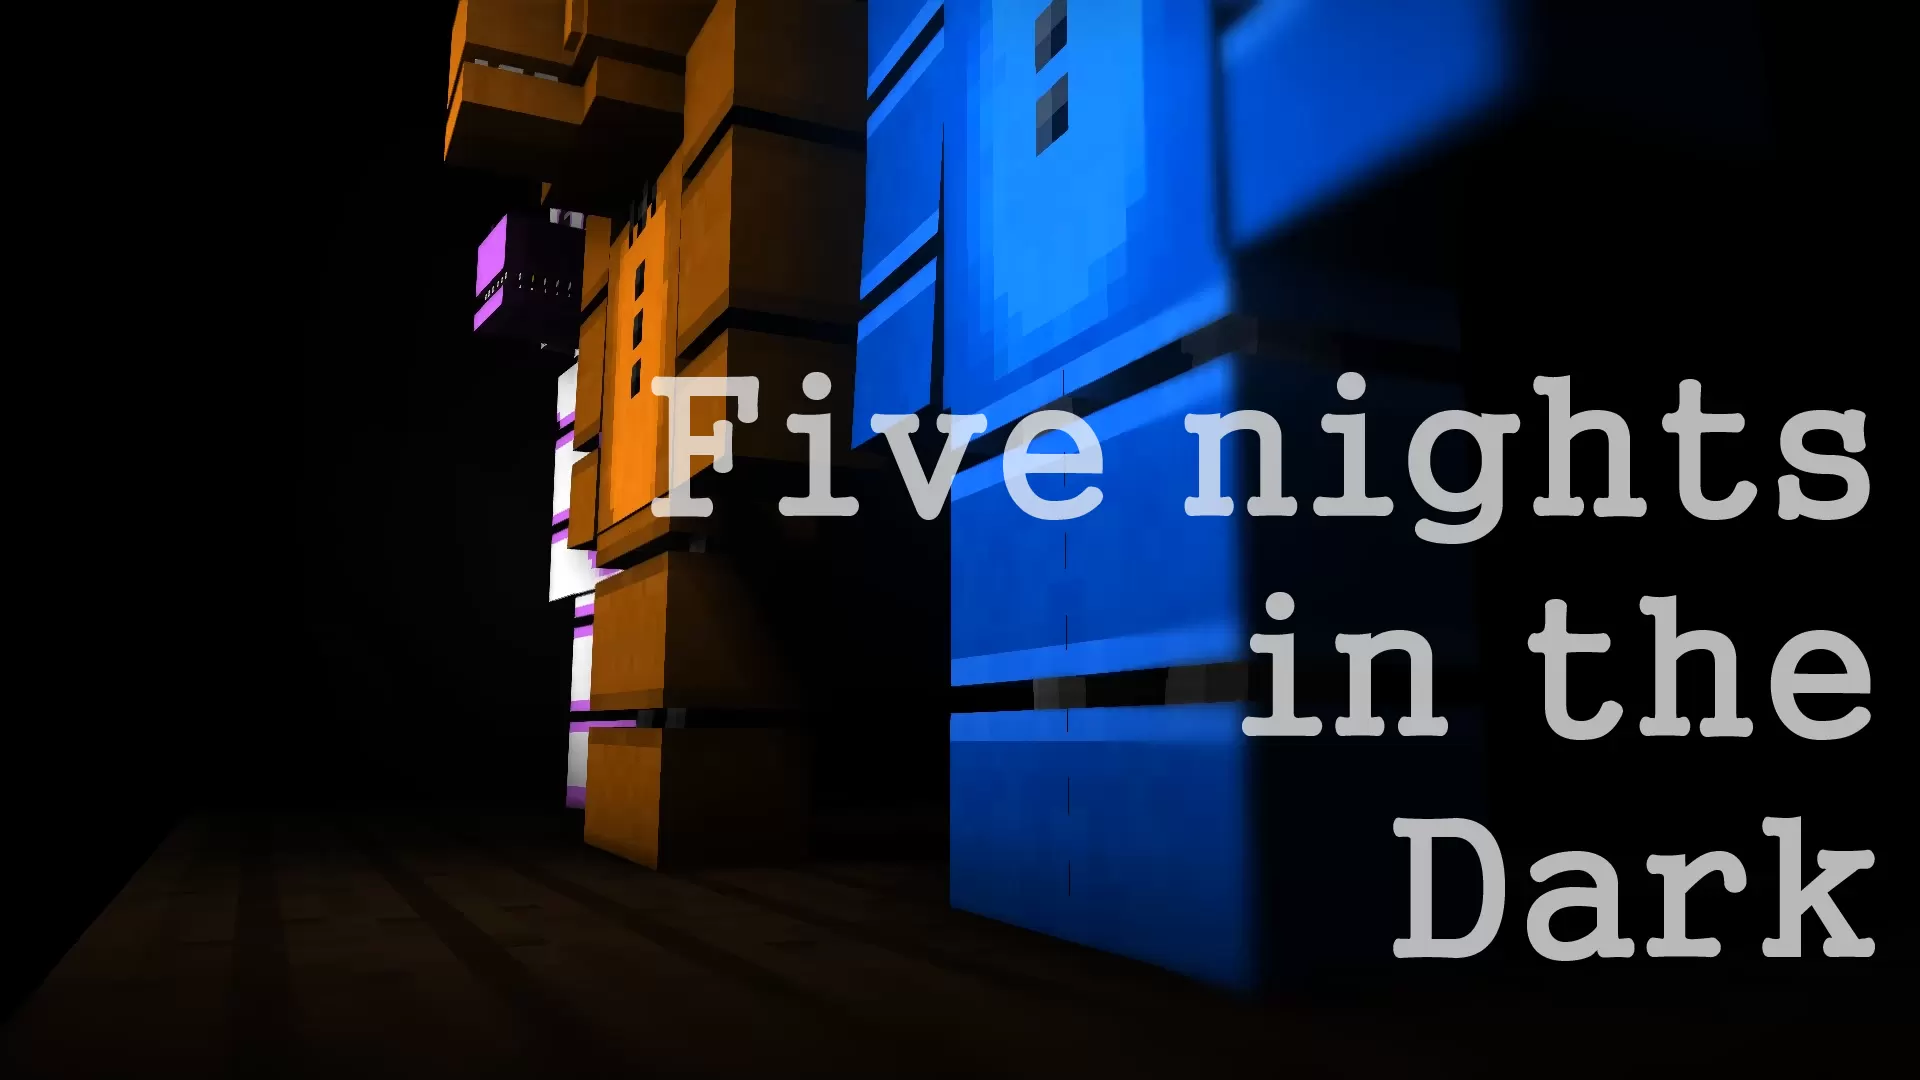 Five Nights at Freddy's 1 Map for 1.8! Minecraft Map